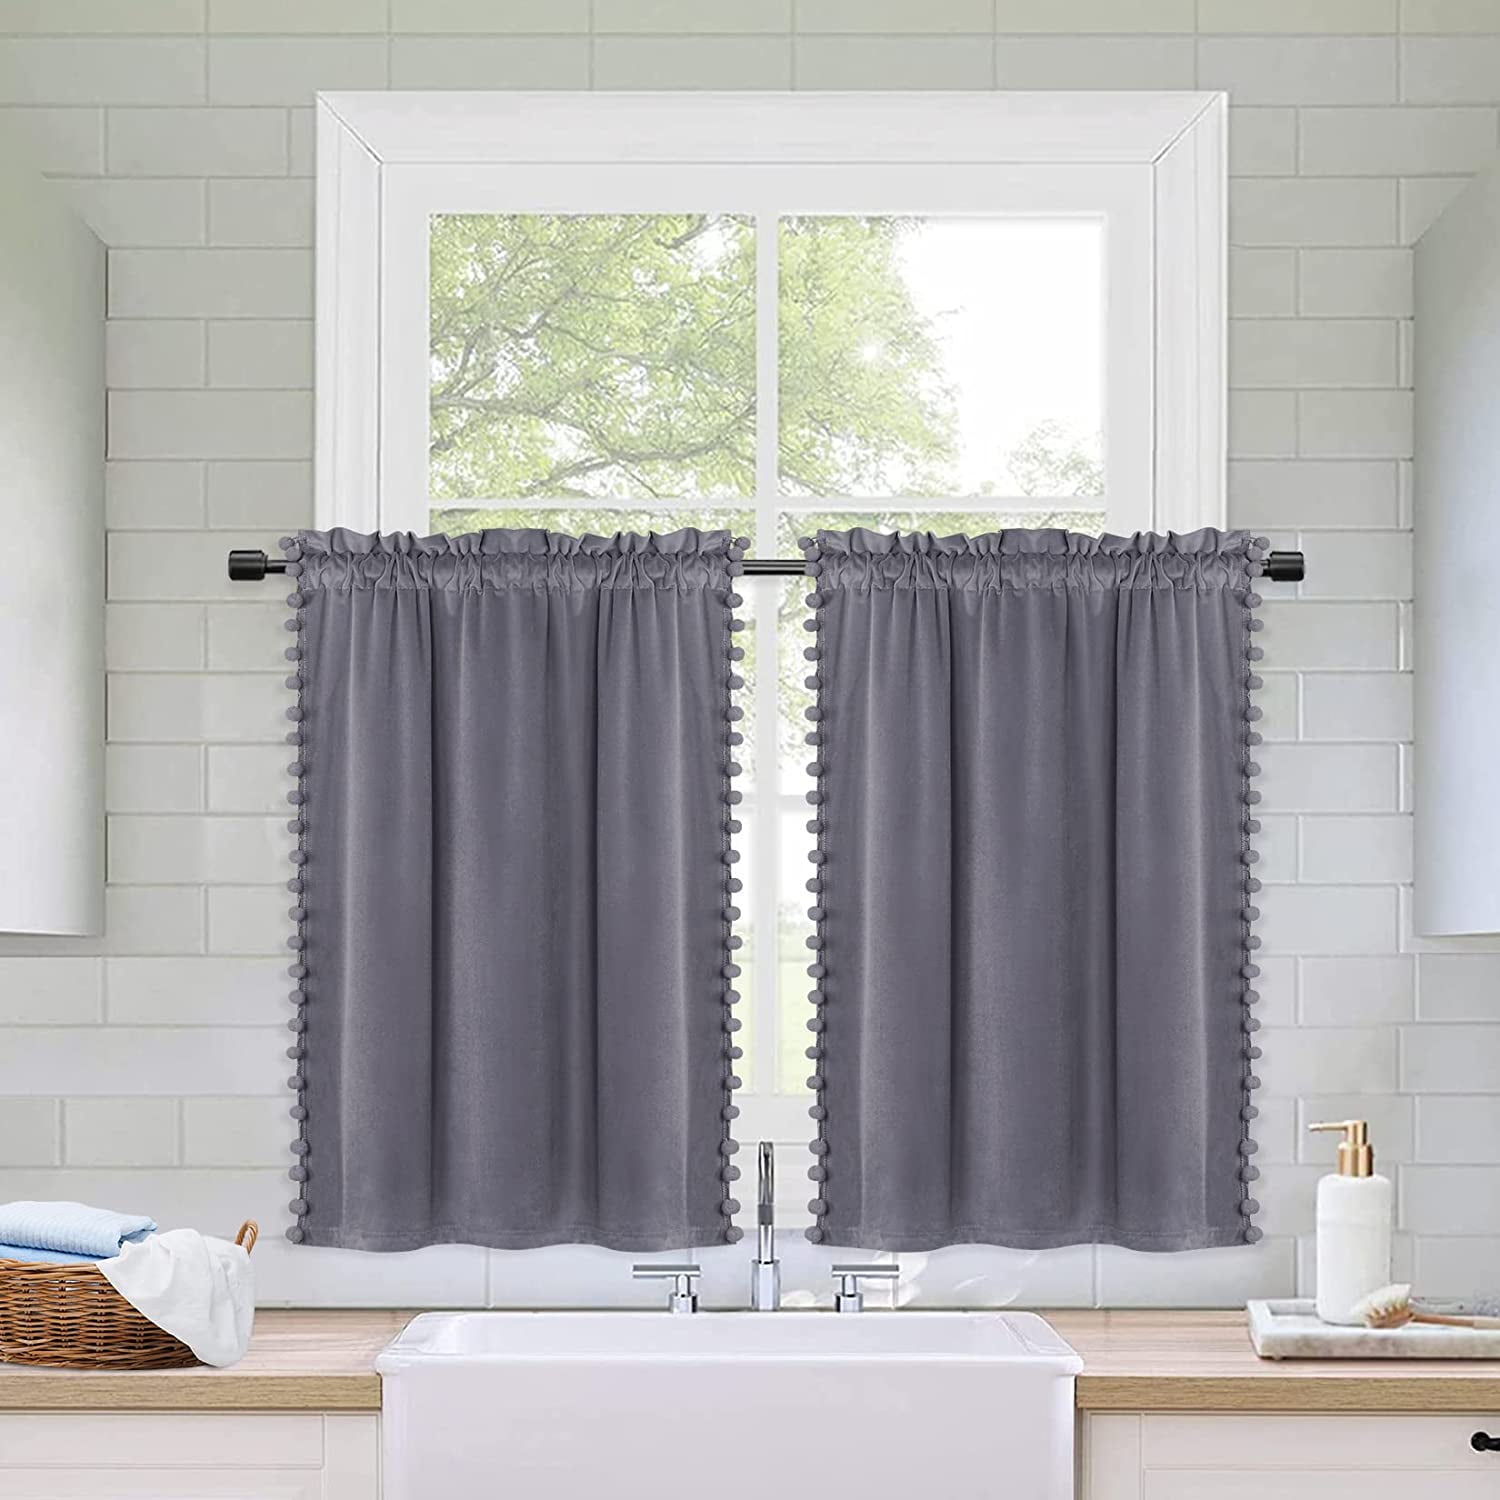 Short Curtains Gray Half Window For Bedroom Small Curtain Tiers Windows Soft Velvet Panels Bathroom Shades Treatments Set 26 W X 30 L Grey 2pack